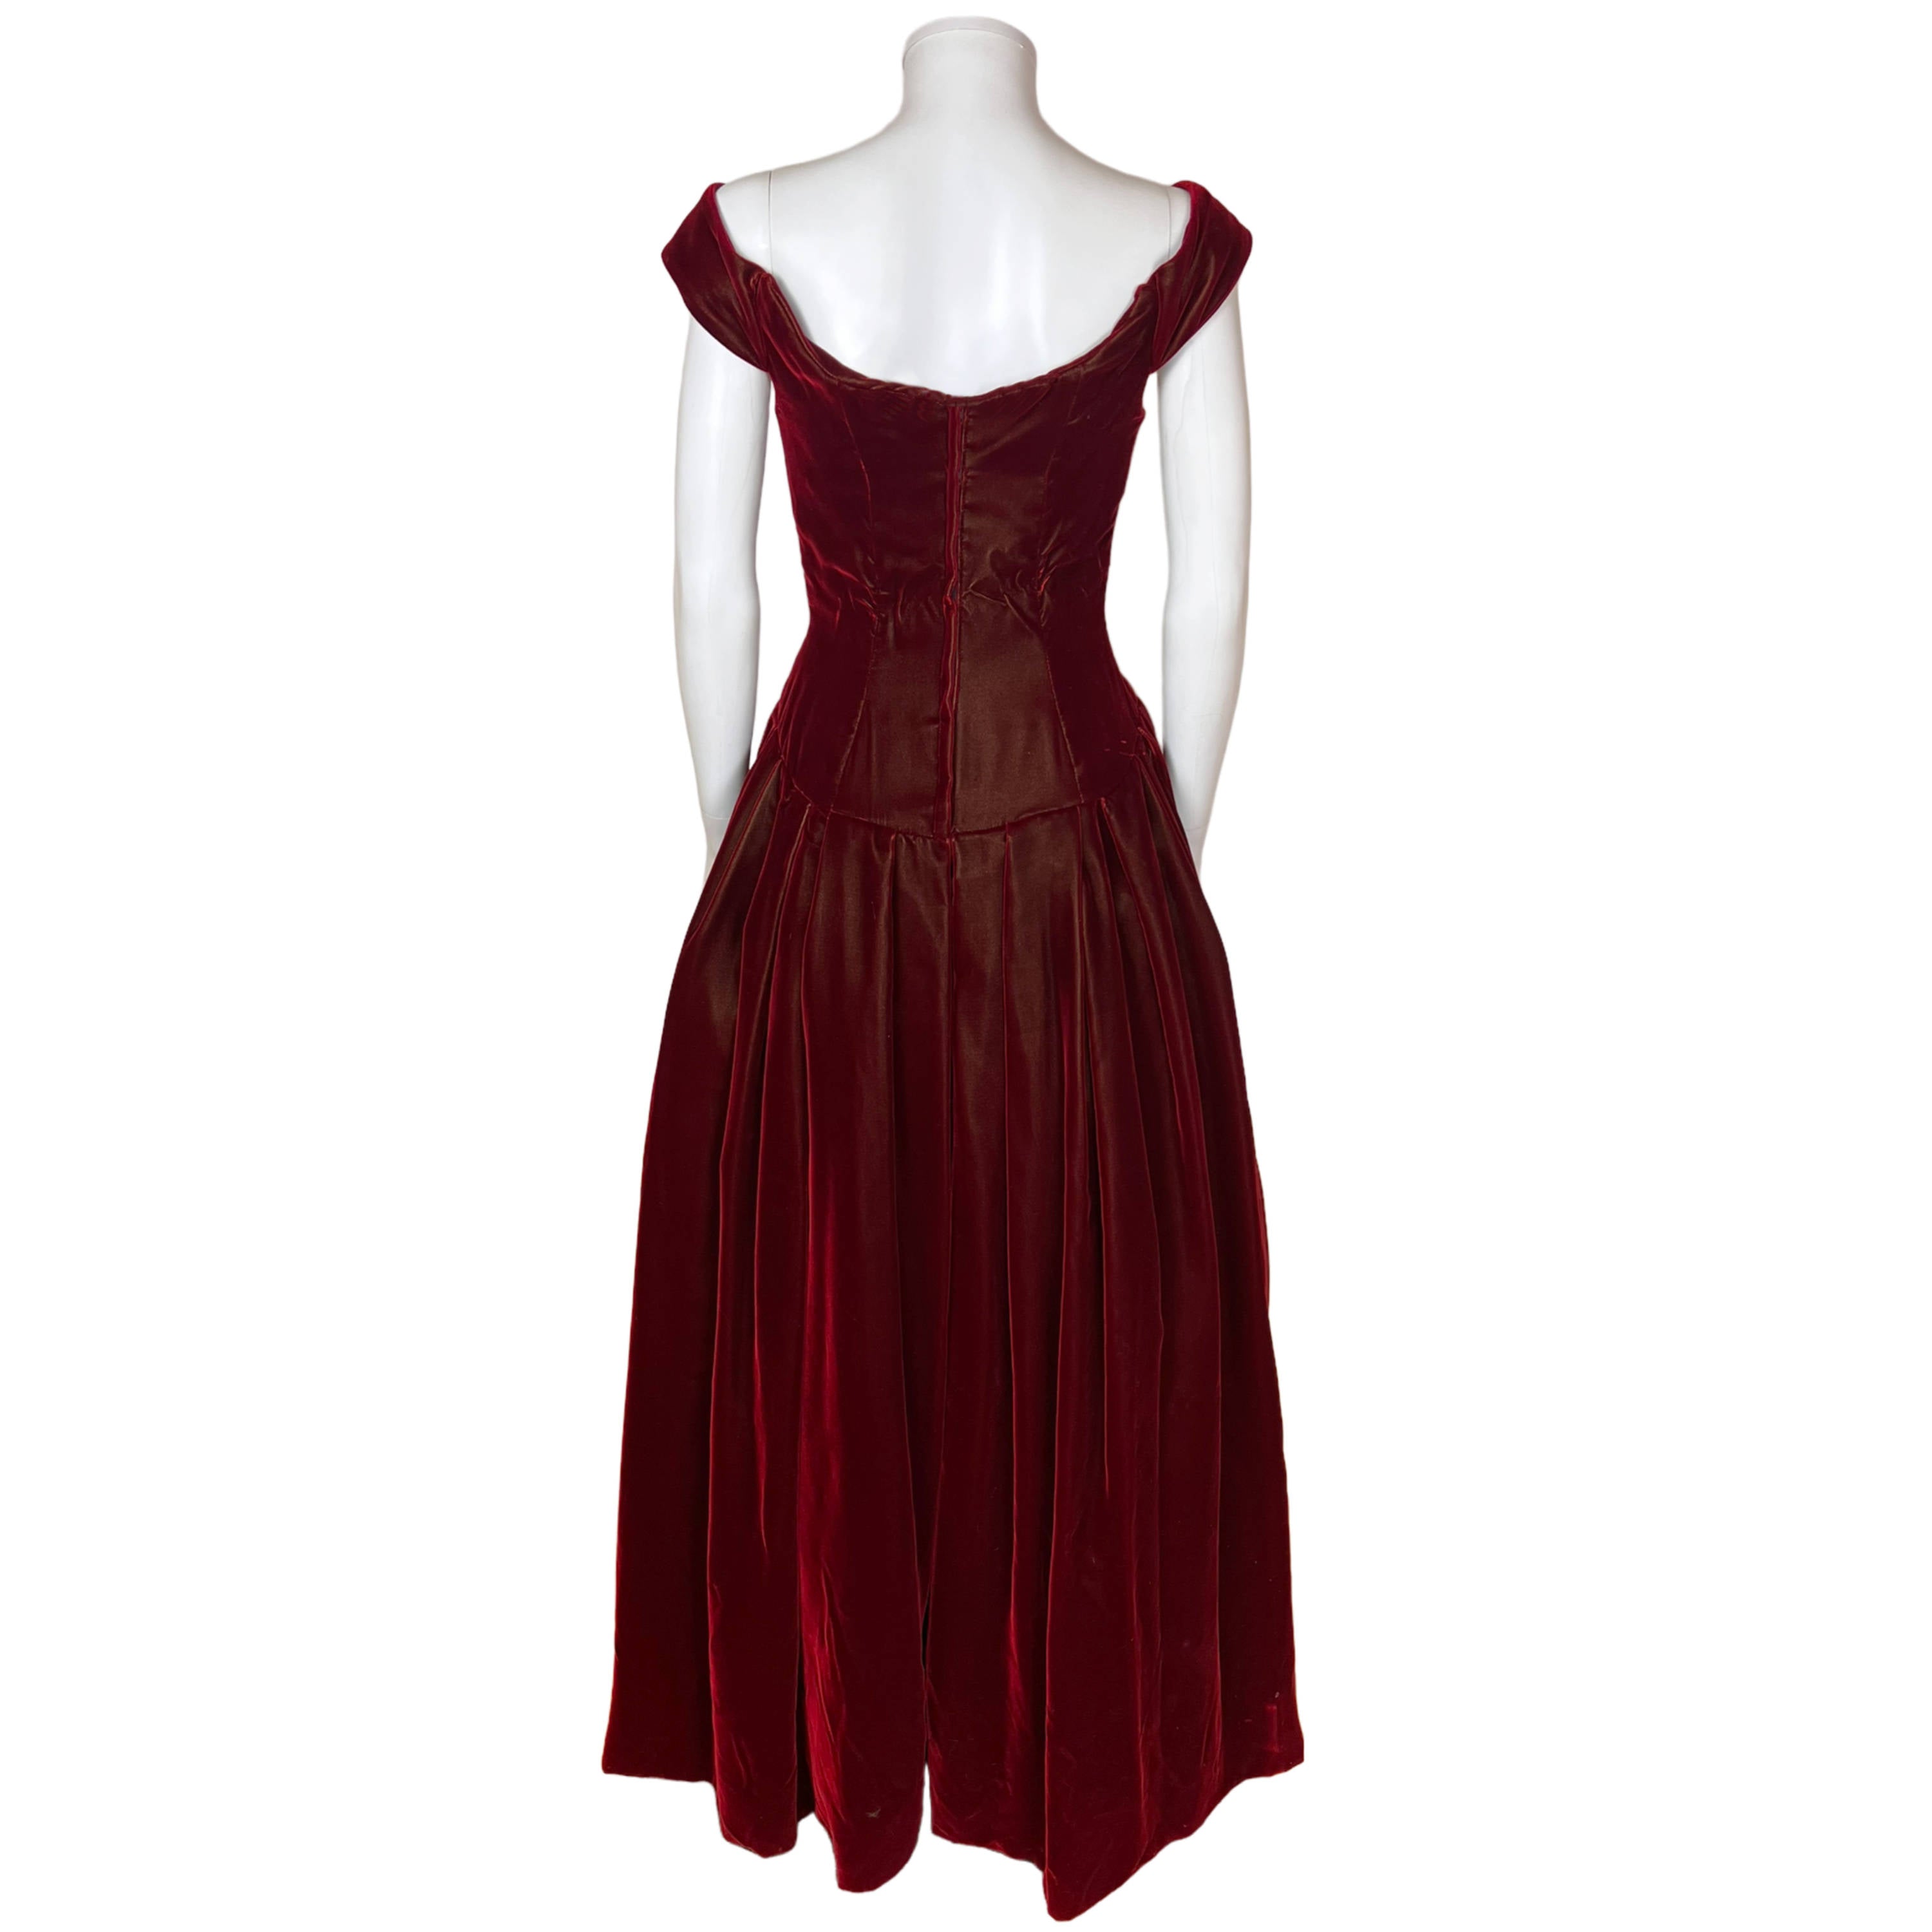 Vintage Evening Gowns and Formal Wear | Poppy's Vintage Clothing